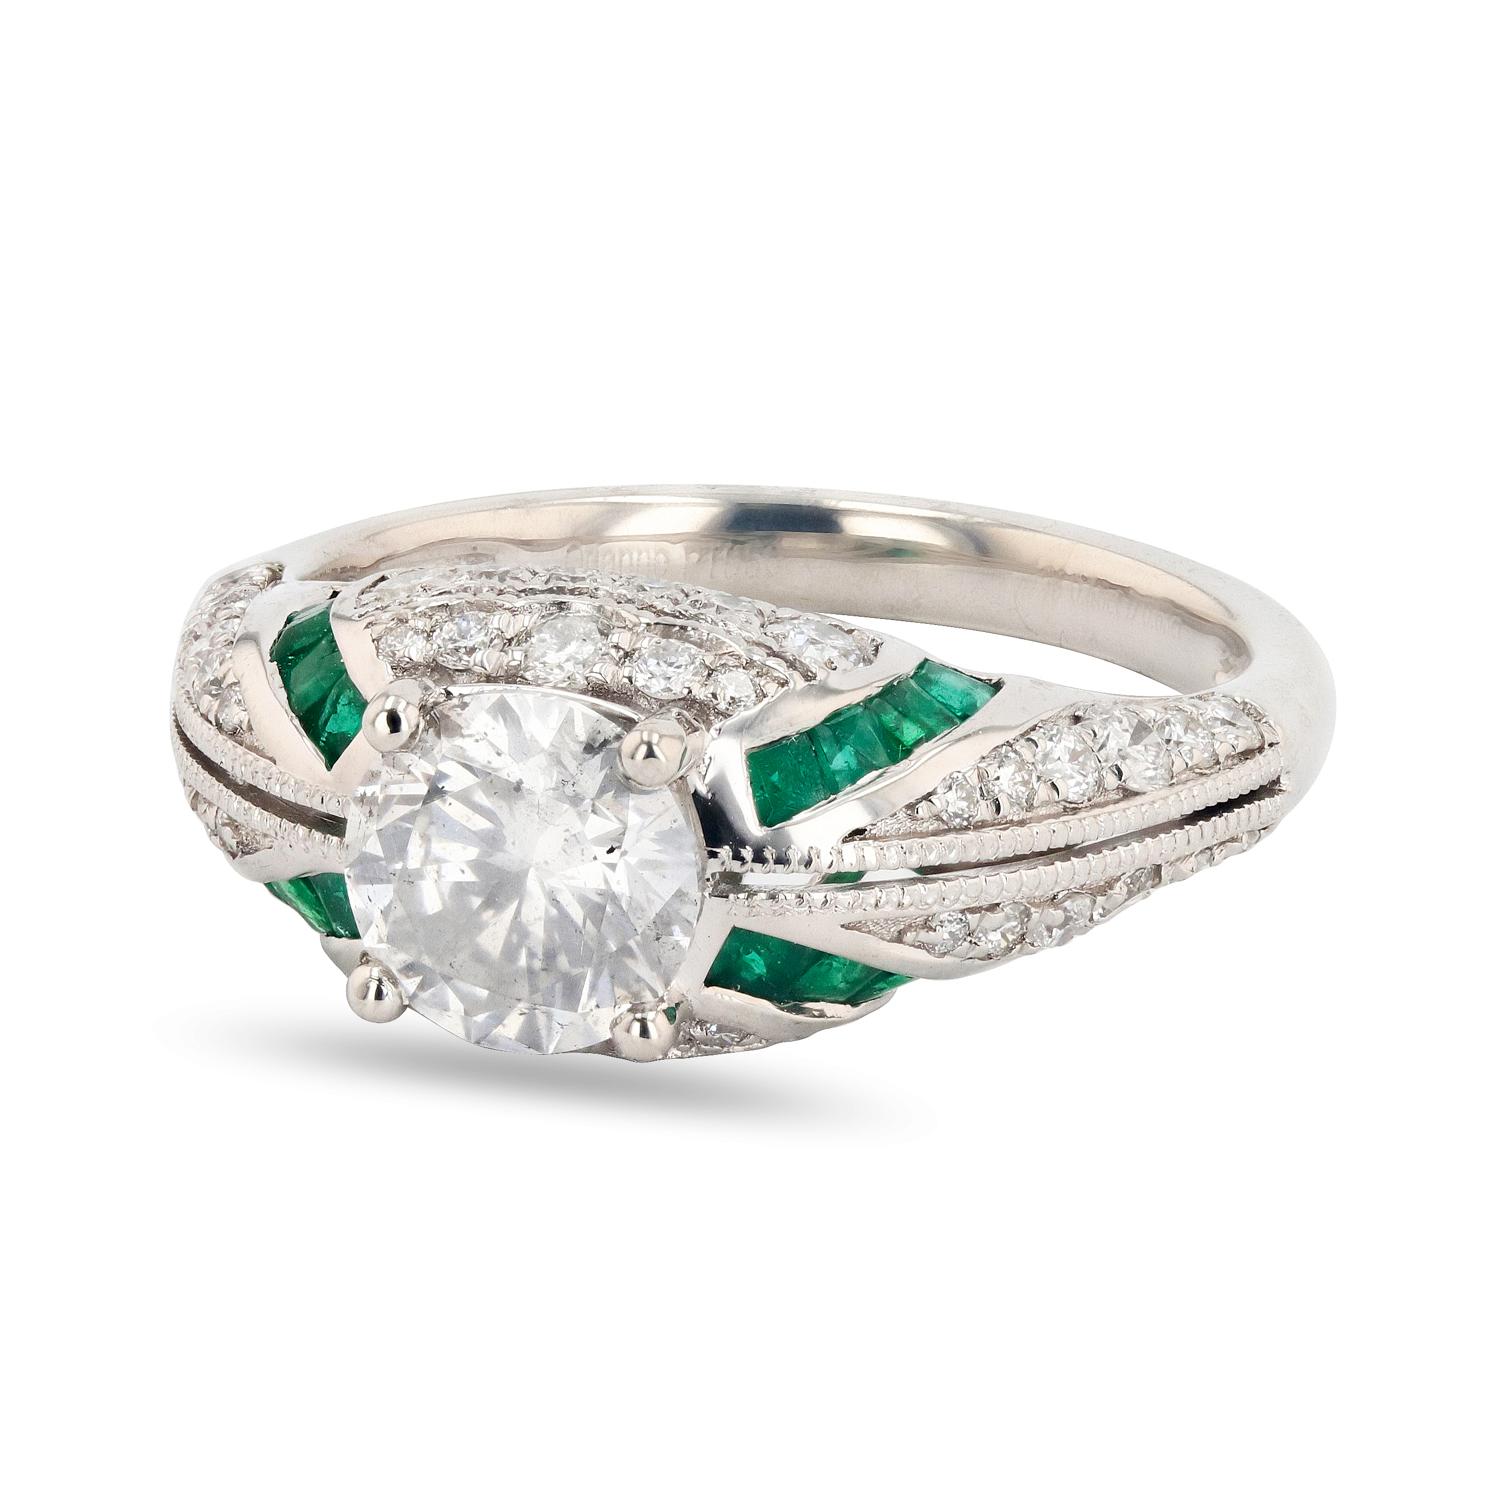 Platinum Diamond & Emerald Ring 
One polished, stamped, and tested platinum ring with a bright finish. The ring is mounted with 1 genuine diamond center stone weighing approximately 1.14 carat, 16 genuine faceted emeralds weighing approximately 0.46